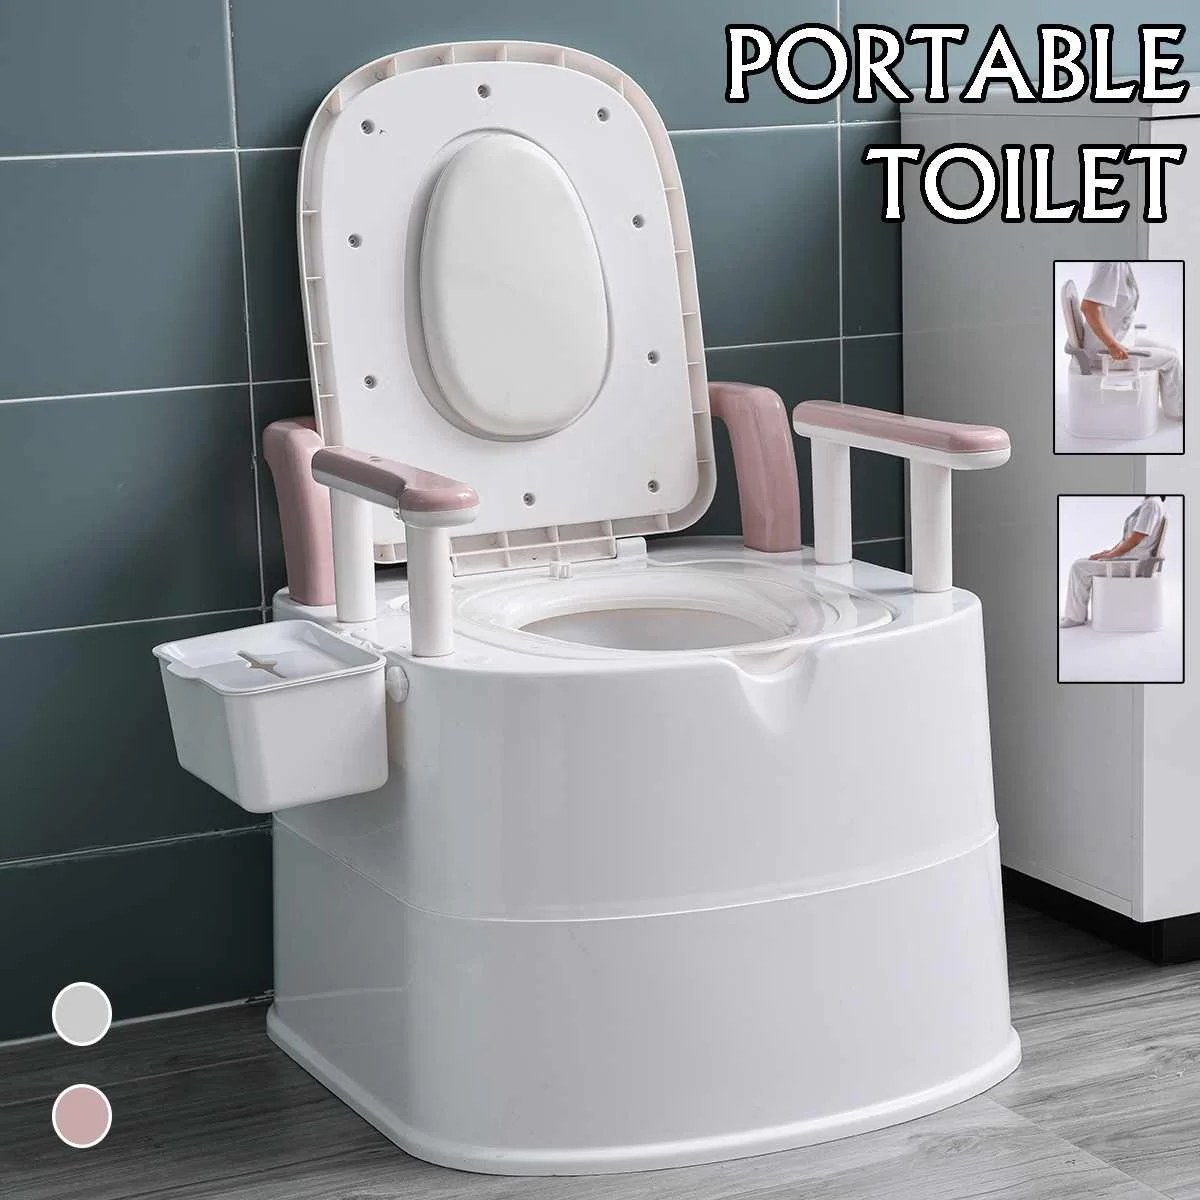 Portable Toilet Commode Old Elder Pregnant Woman Removable Toilet Barrel Seat Kit Home Bathroom Potty Outdoor Camping Toilets